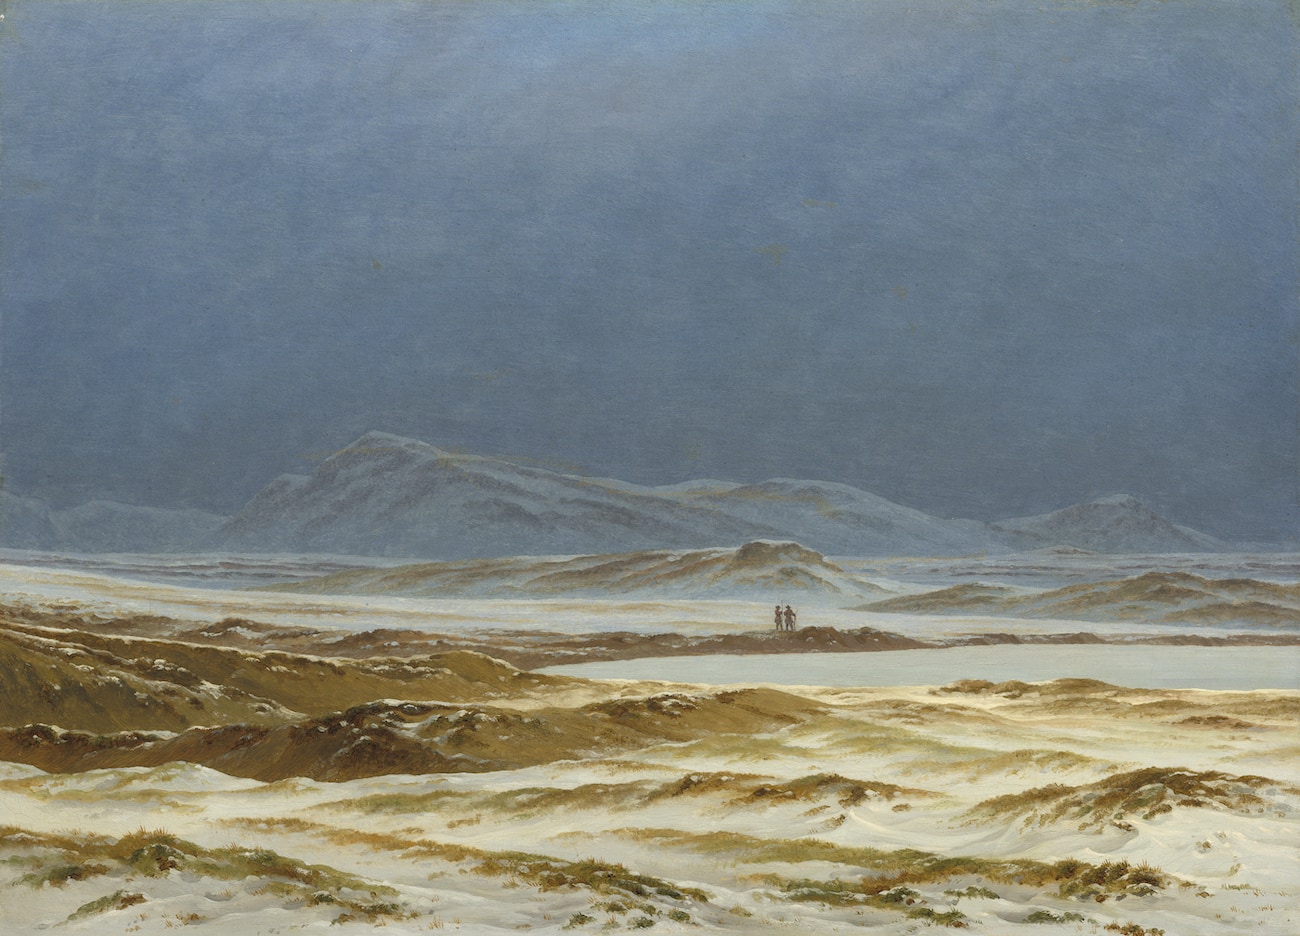 Northern Landscape, Spring, 1825, Caspar David Friedrich, Courtesy National Gallery of Art, Washington (article on automatic negative thoughts)